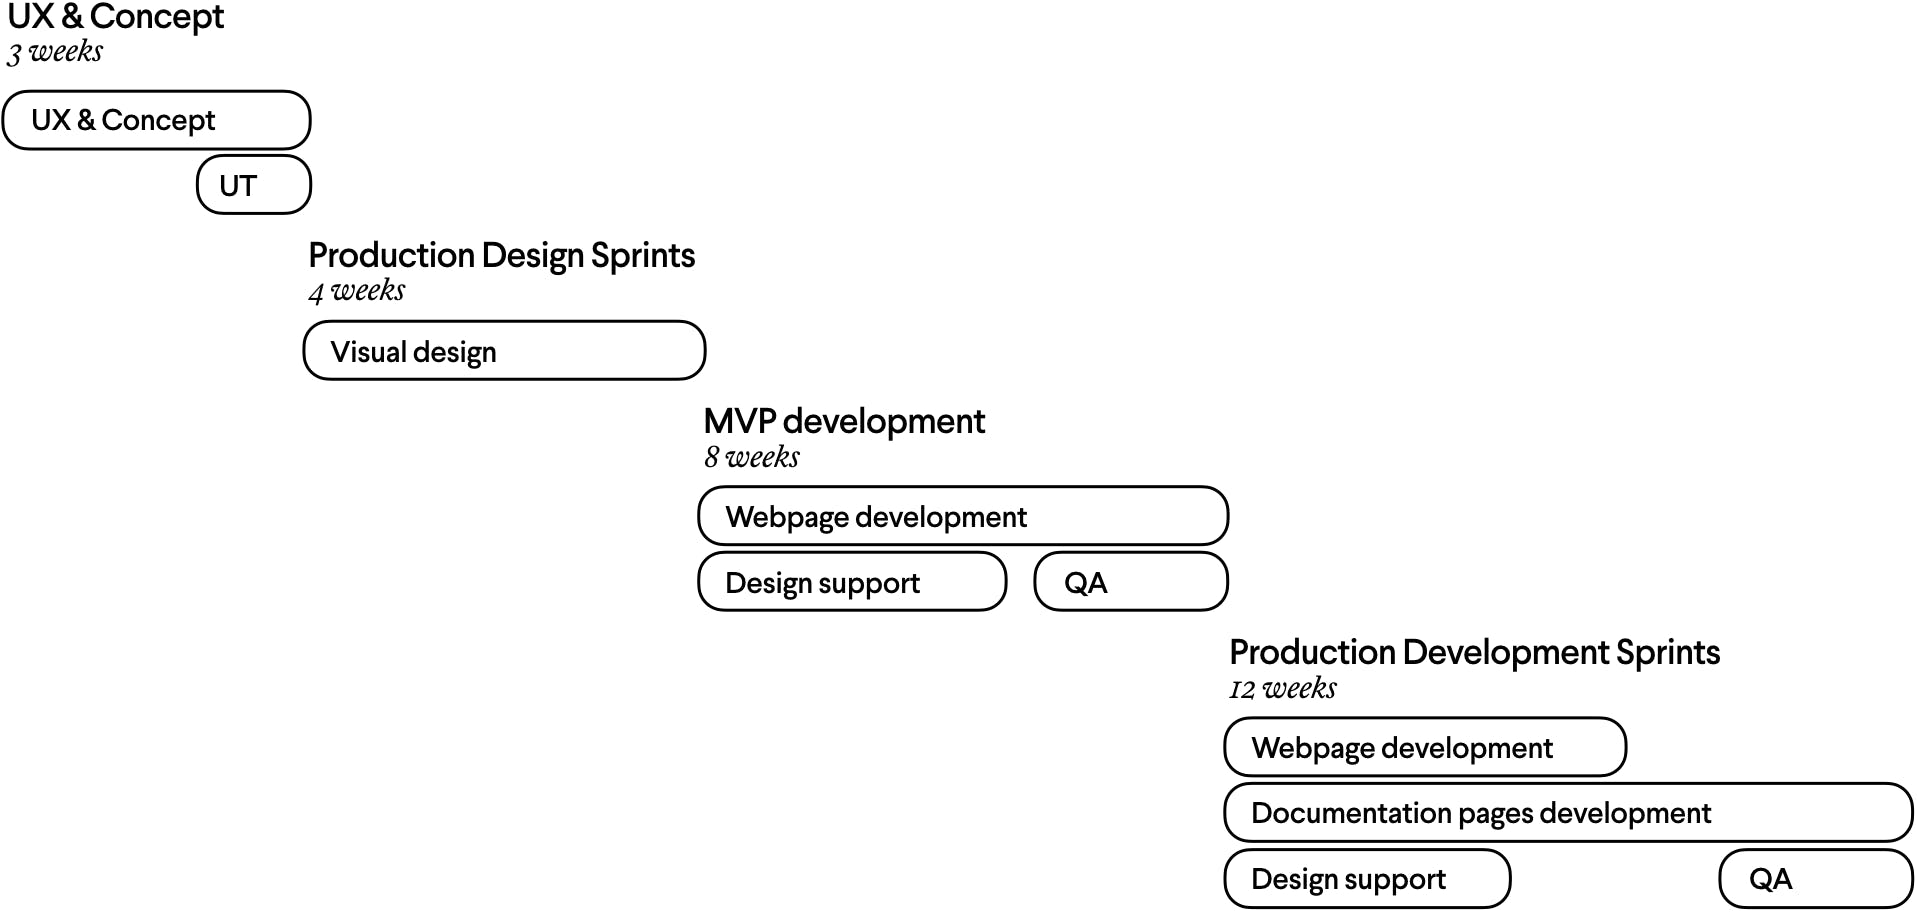 Map of project showing timeline of deliverables across UX and concept, MVP, production design and development sprints